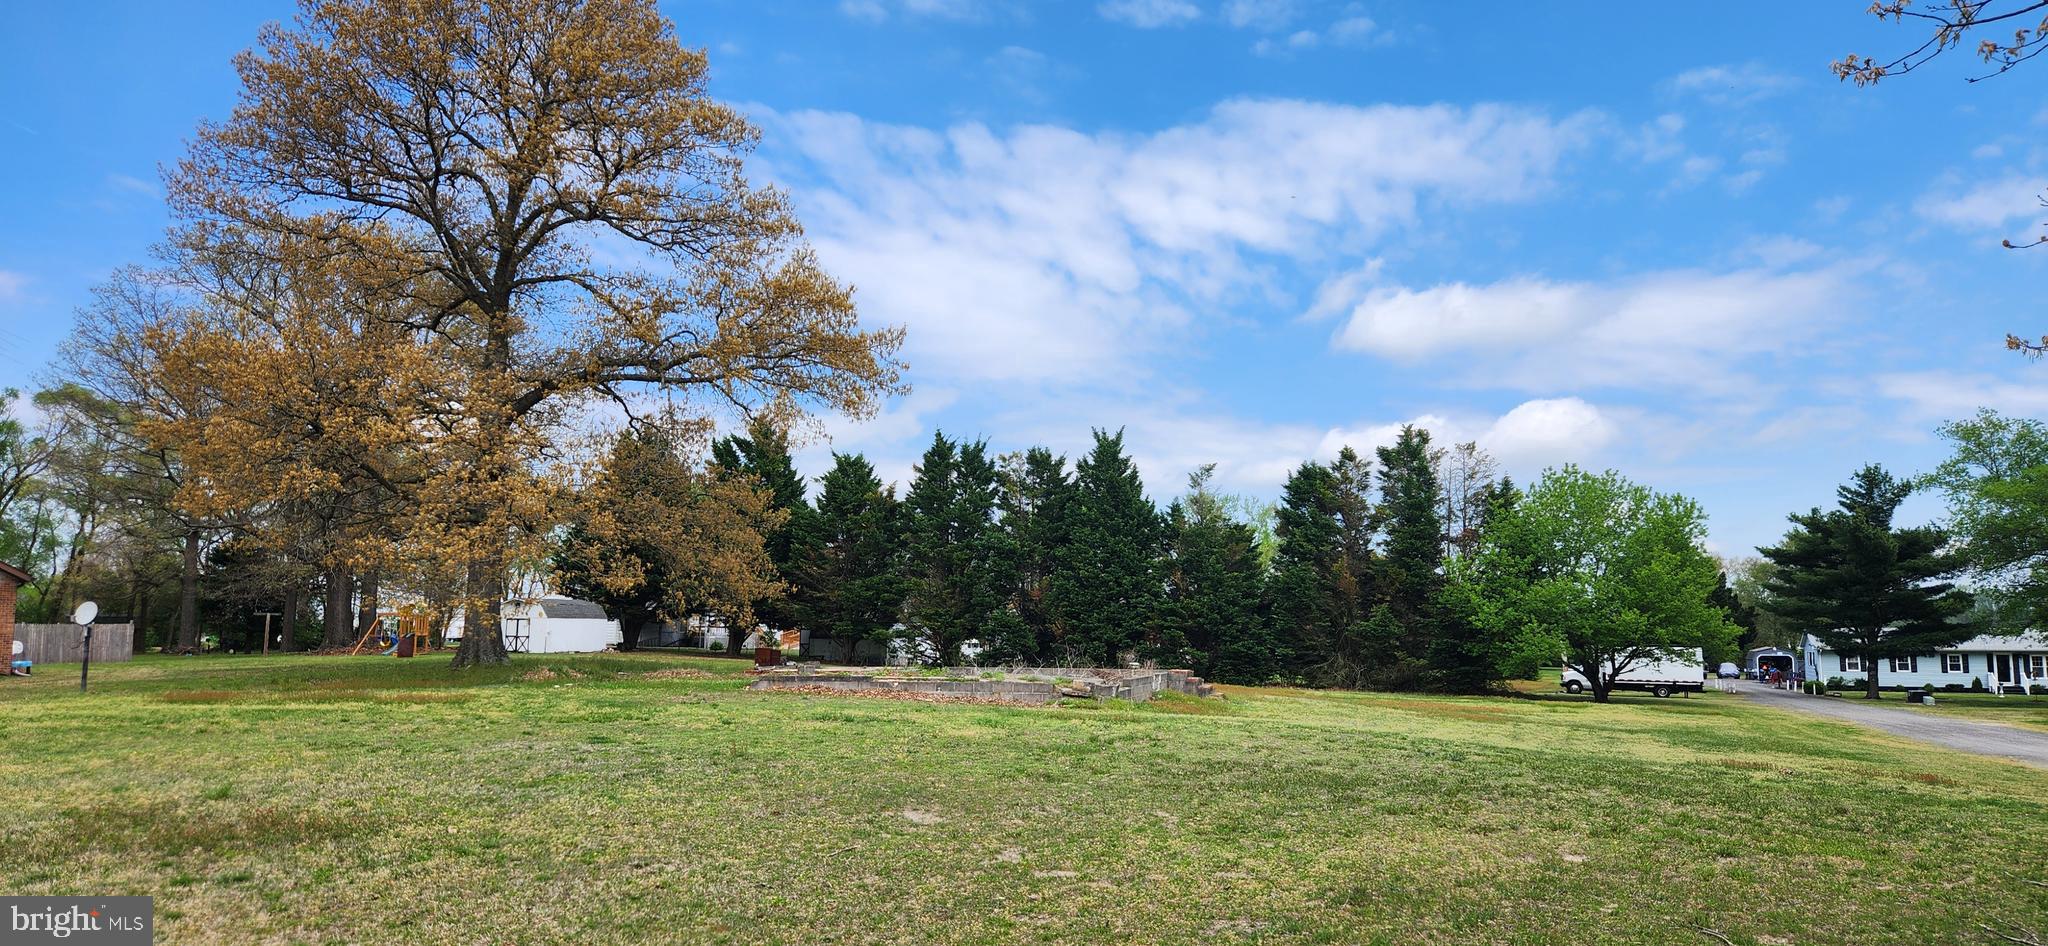 a view of a field with trees around